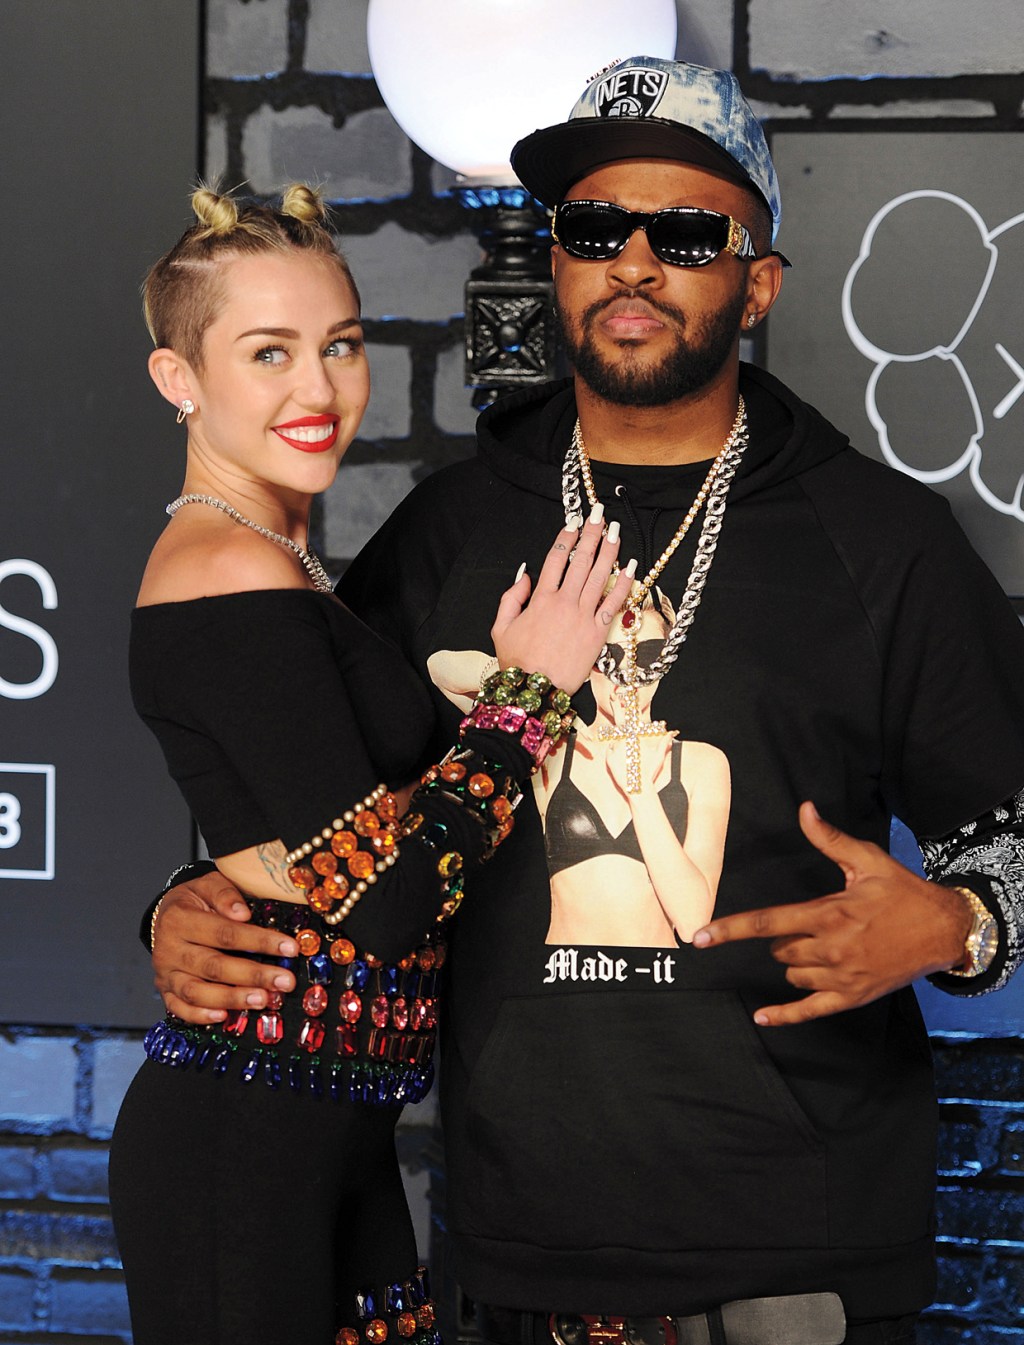 donald abbey recommends miley cyrus getting banged pic